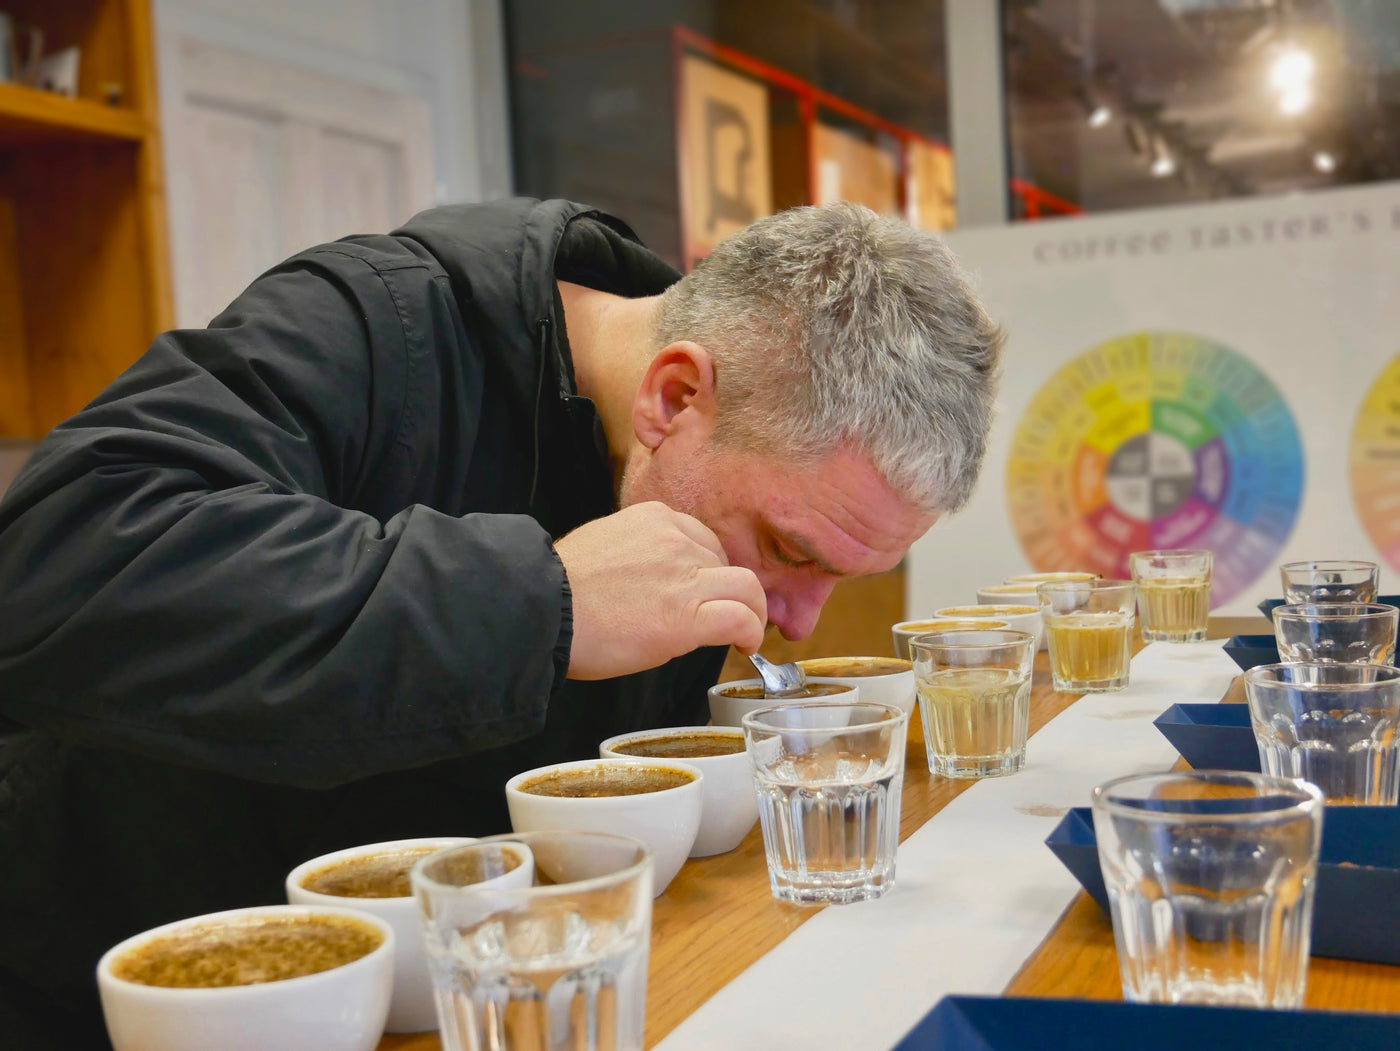 Cupping v Coffee Source